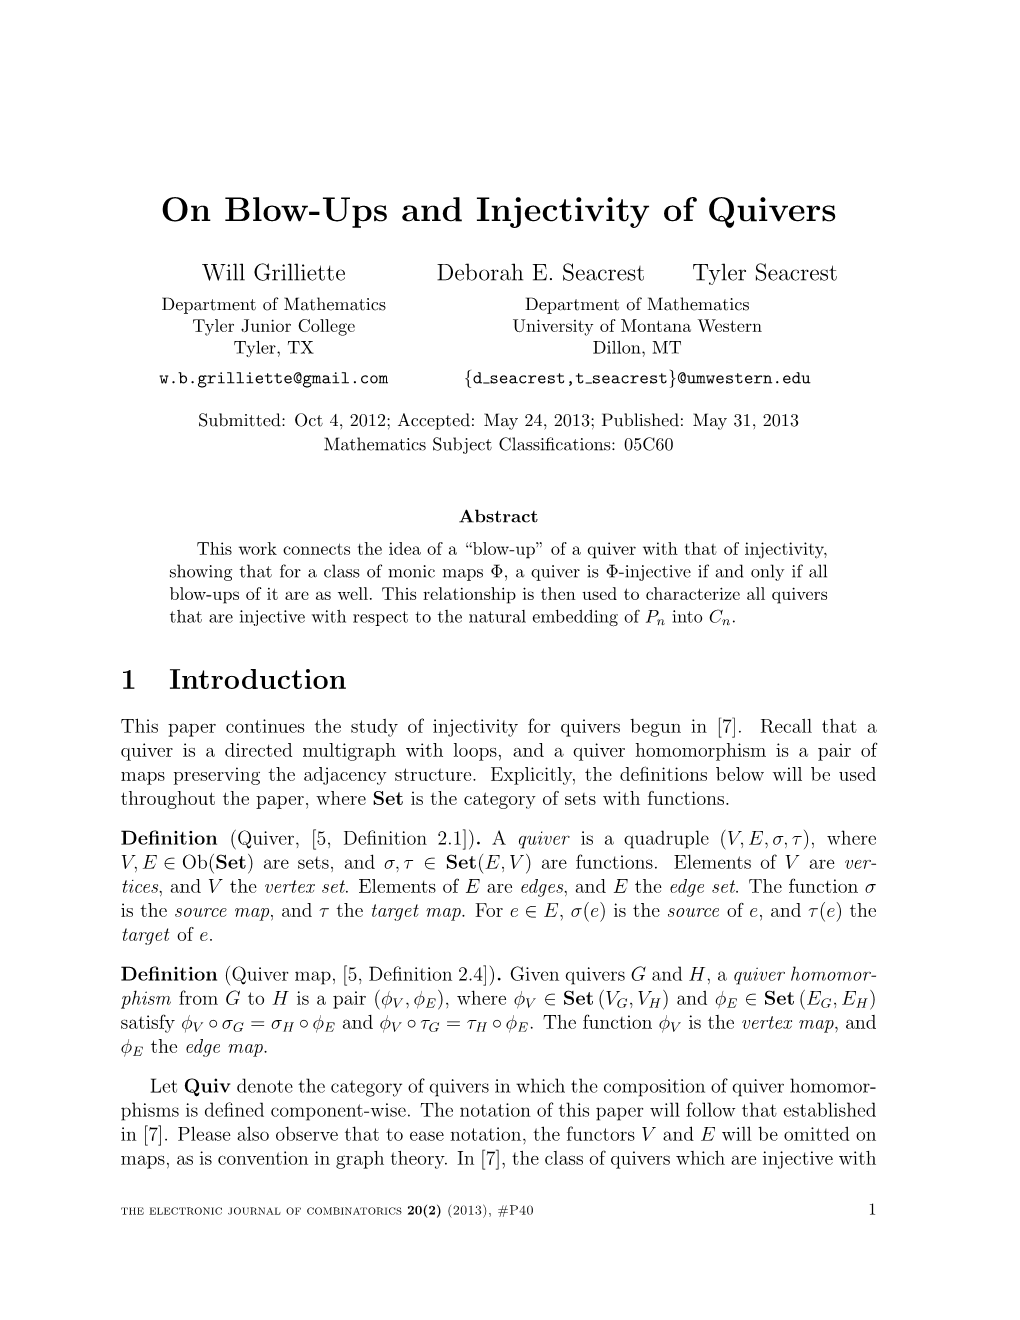 On Blow-Ups and Injectivity of Quivers